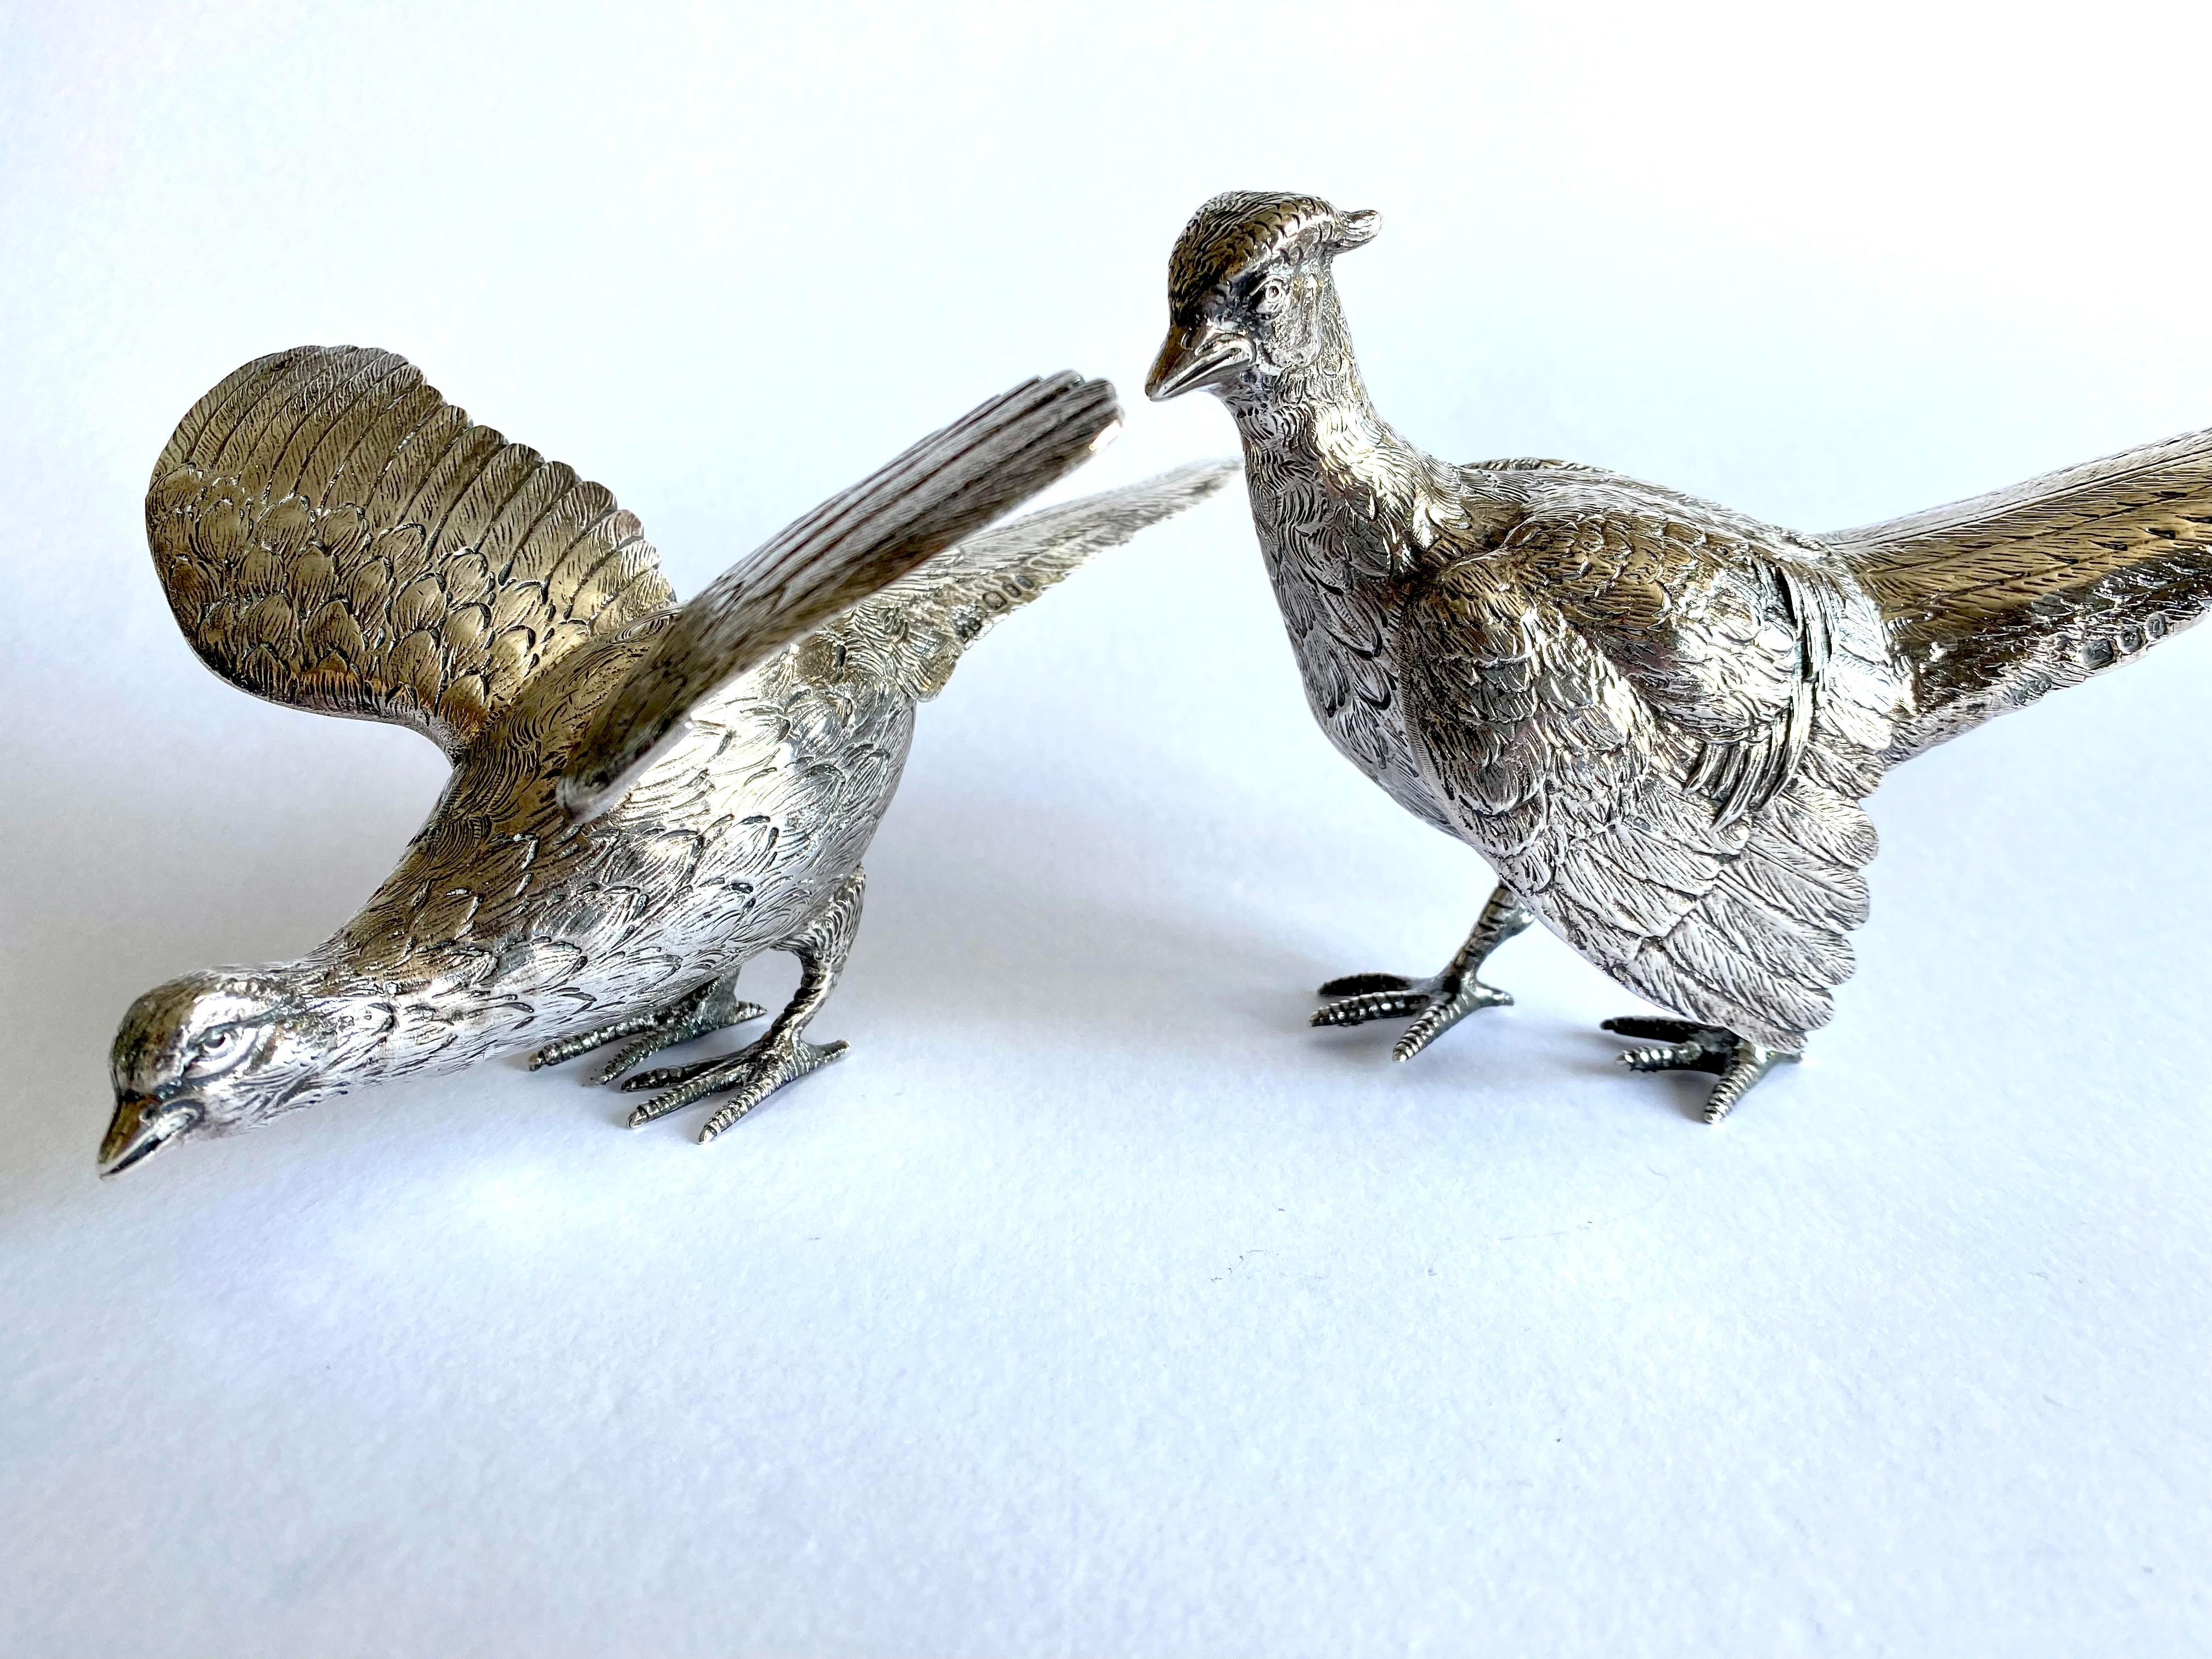 A very handsome Sterling Silver pair of cast pheasants, showing a male and female bird in realistic traditional poses, finely detailed with hand-chased bodies and tail feathers.
In excellent condition.

Hallmarked for London 1968
Silversmith